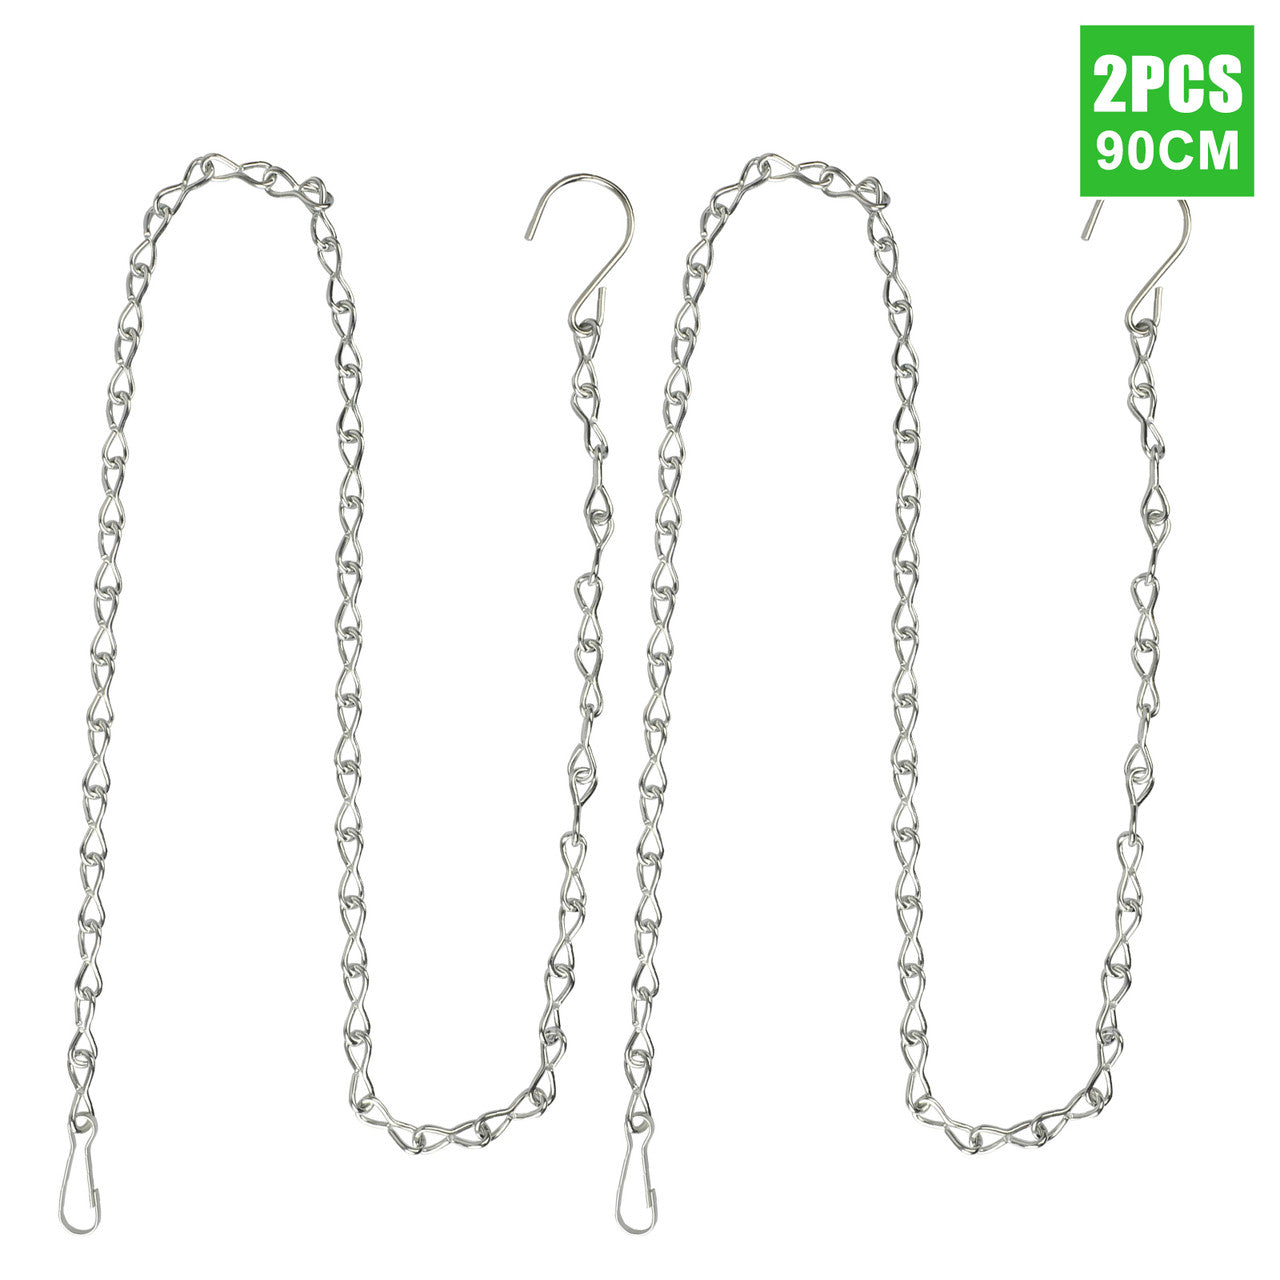 35 Inches Hanging Chain for Decorative Ornaments, Bird Feeders, Planters, (Silver,2pcs)